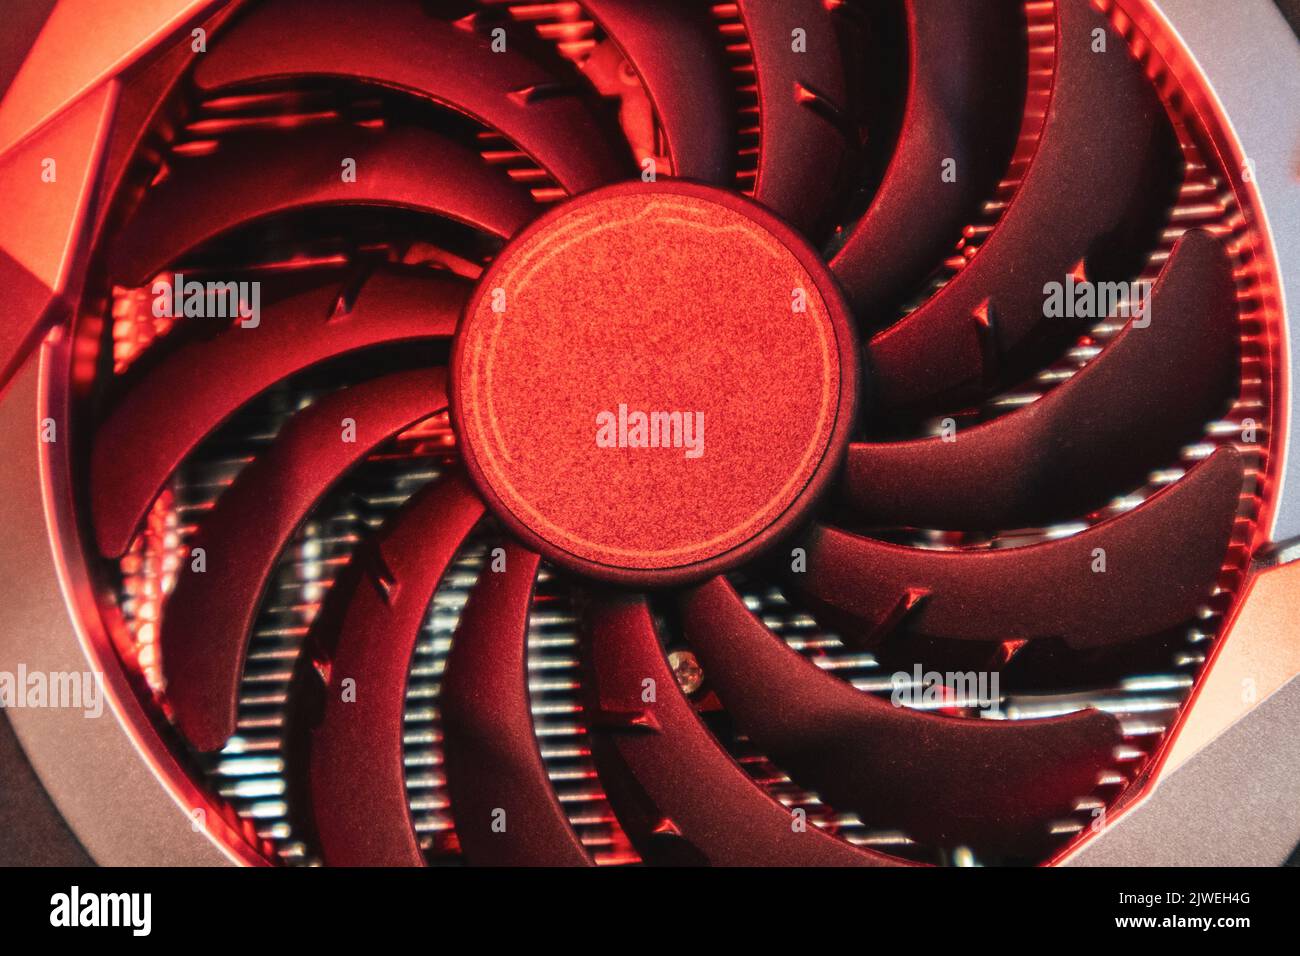 Cooler fan on Gpu graphics video card, close-up in vivid red light, PC hardware details. Components from computer cooling system Stock Photo